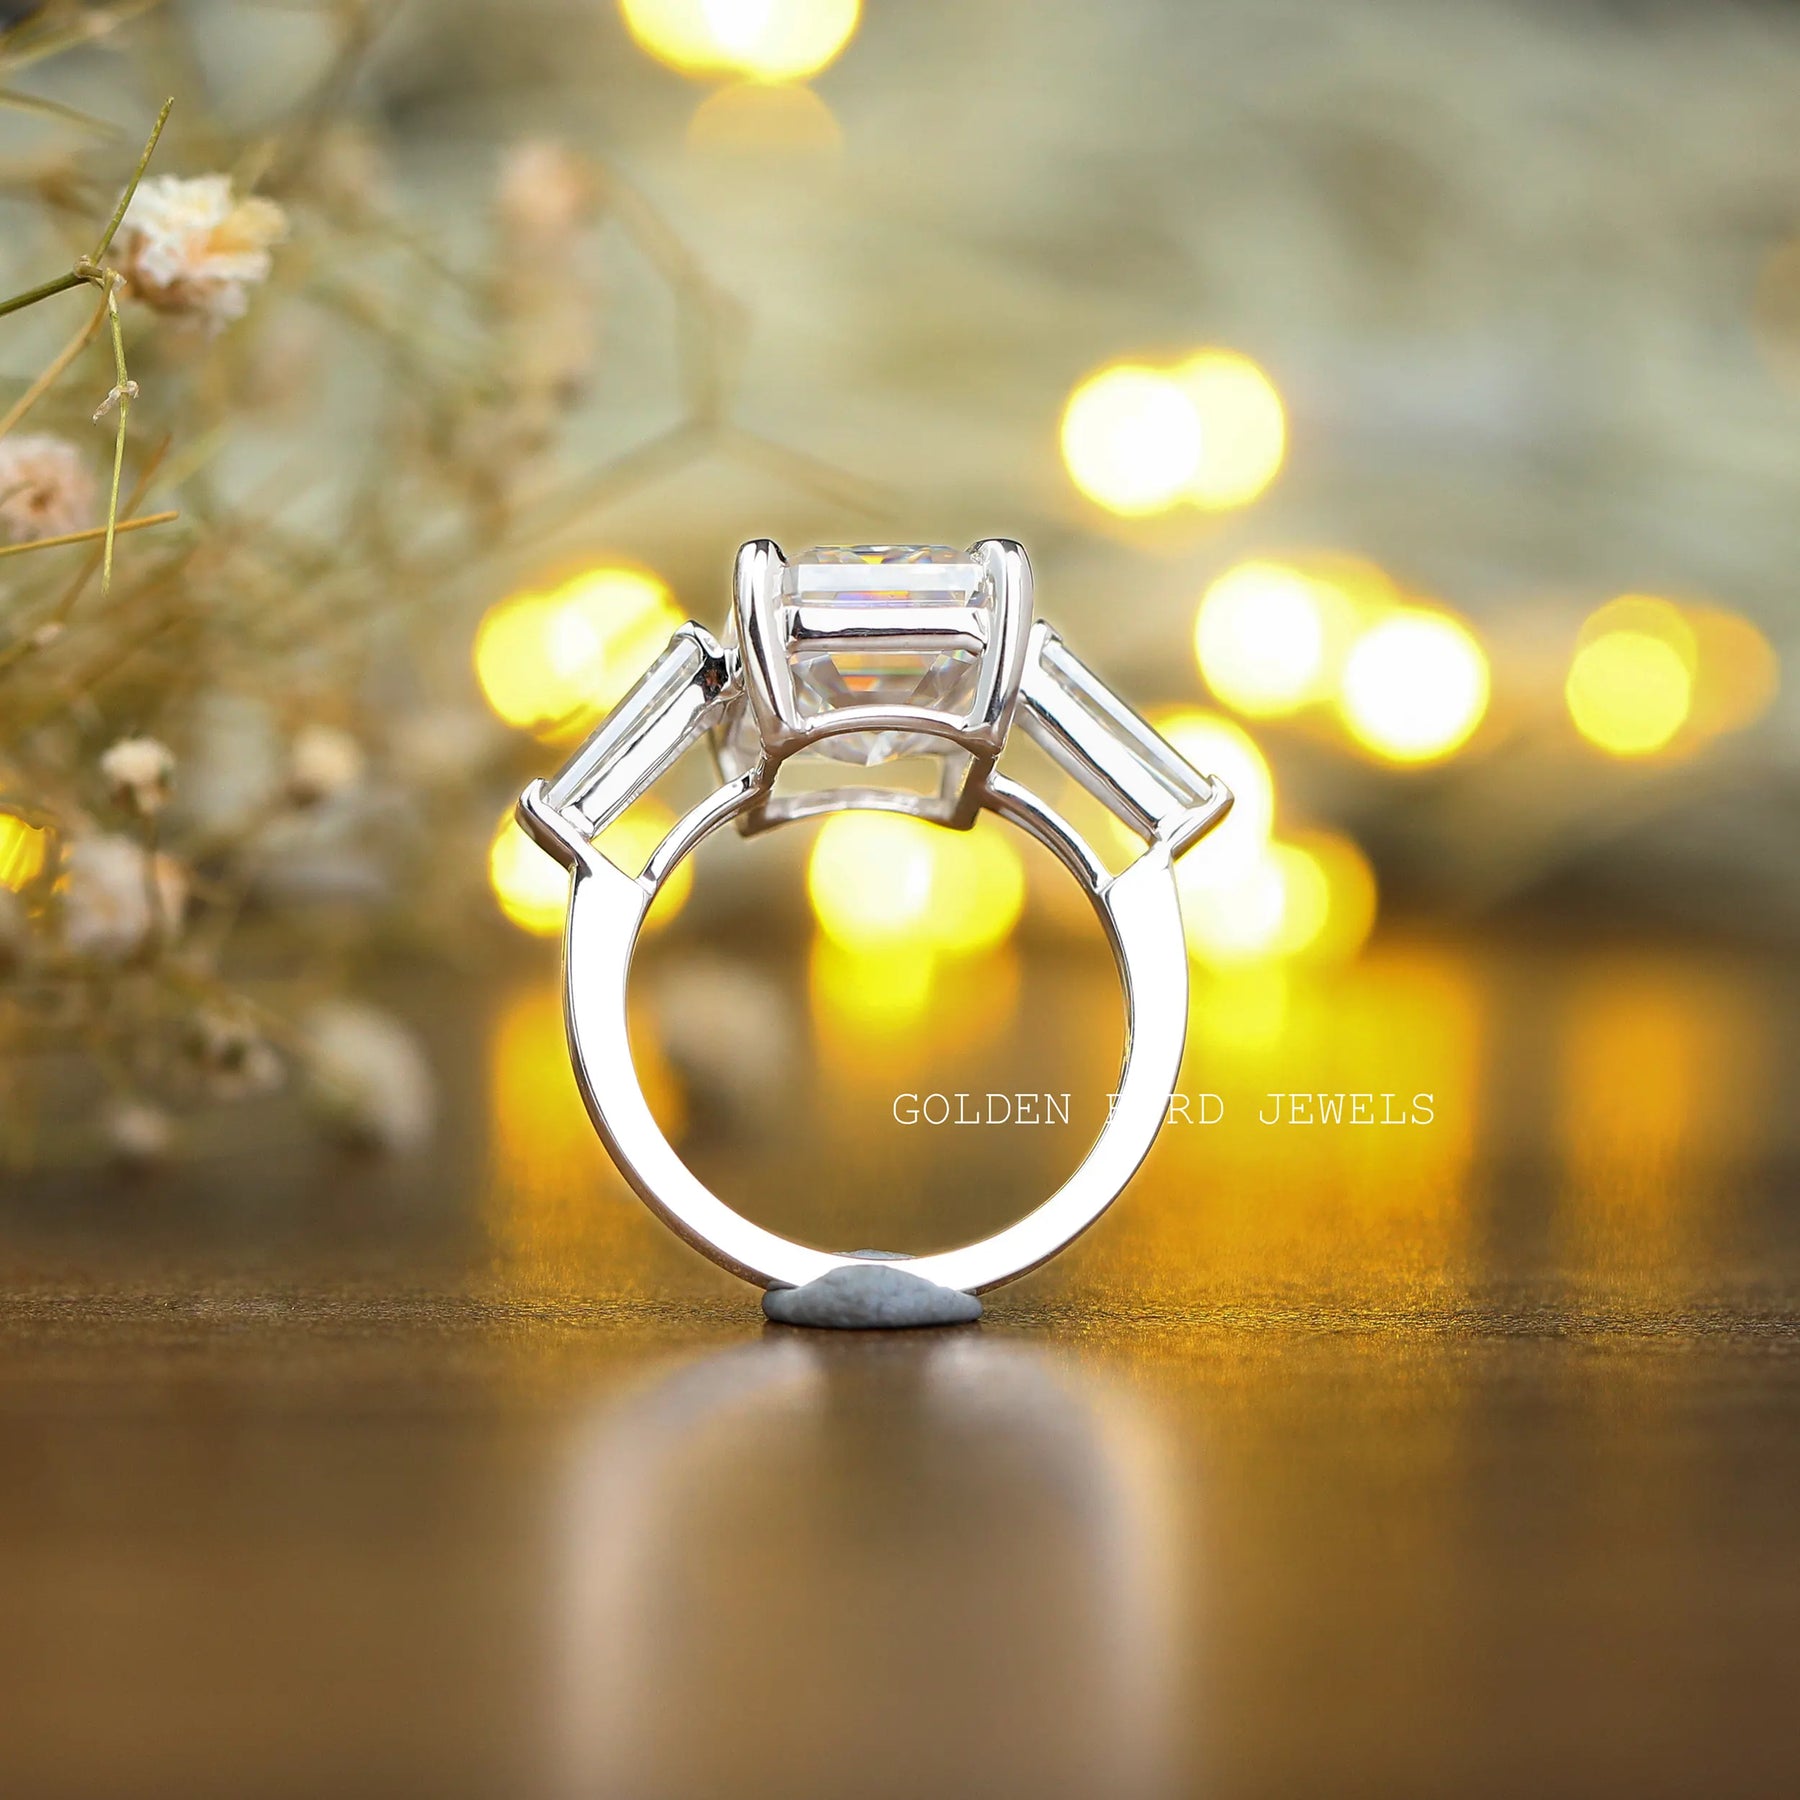 [Vintage Three Stone Engagement Ring Made With Moissanite]-[Golden Bird Jewels]